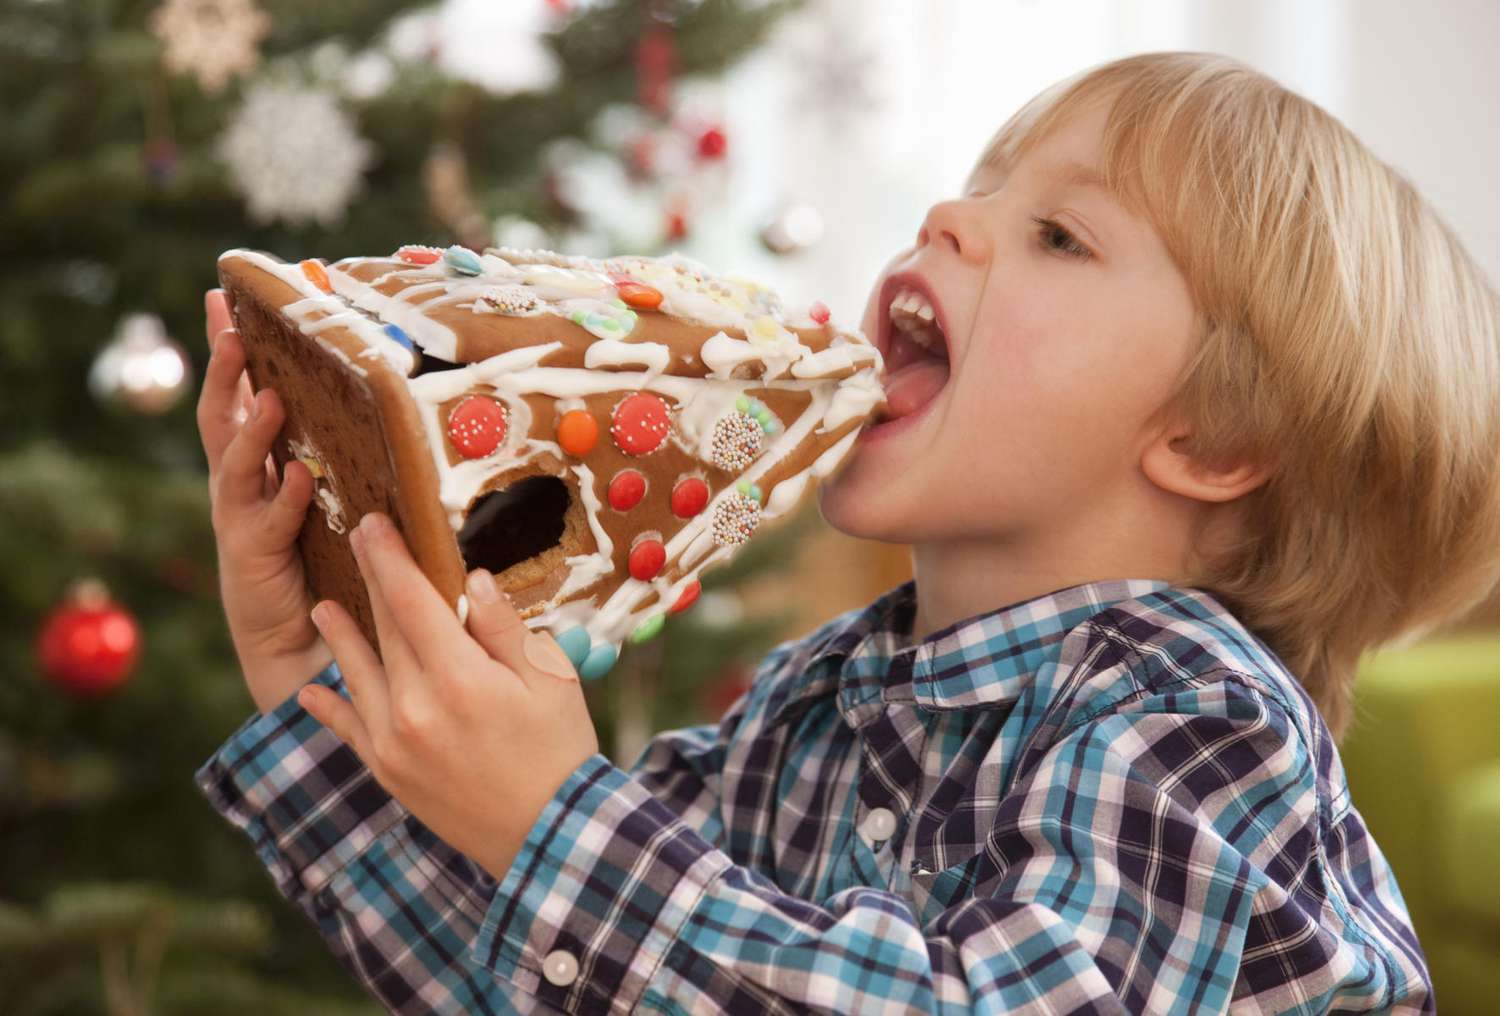 Boy eating entire gingerbread house